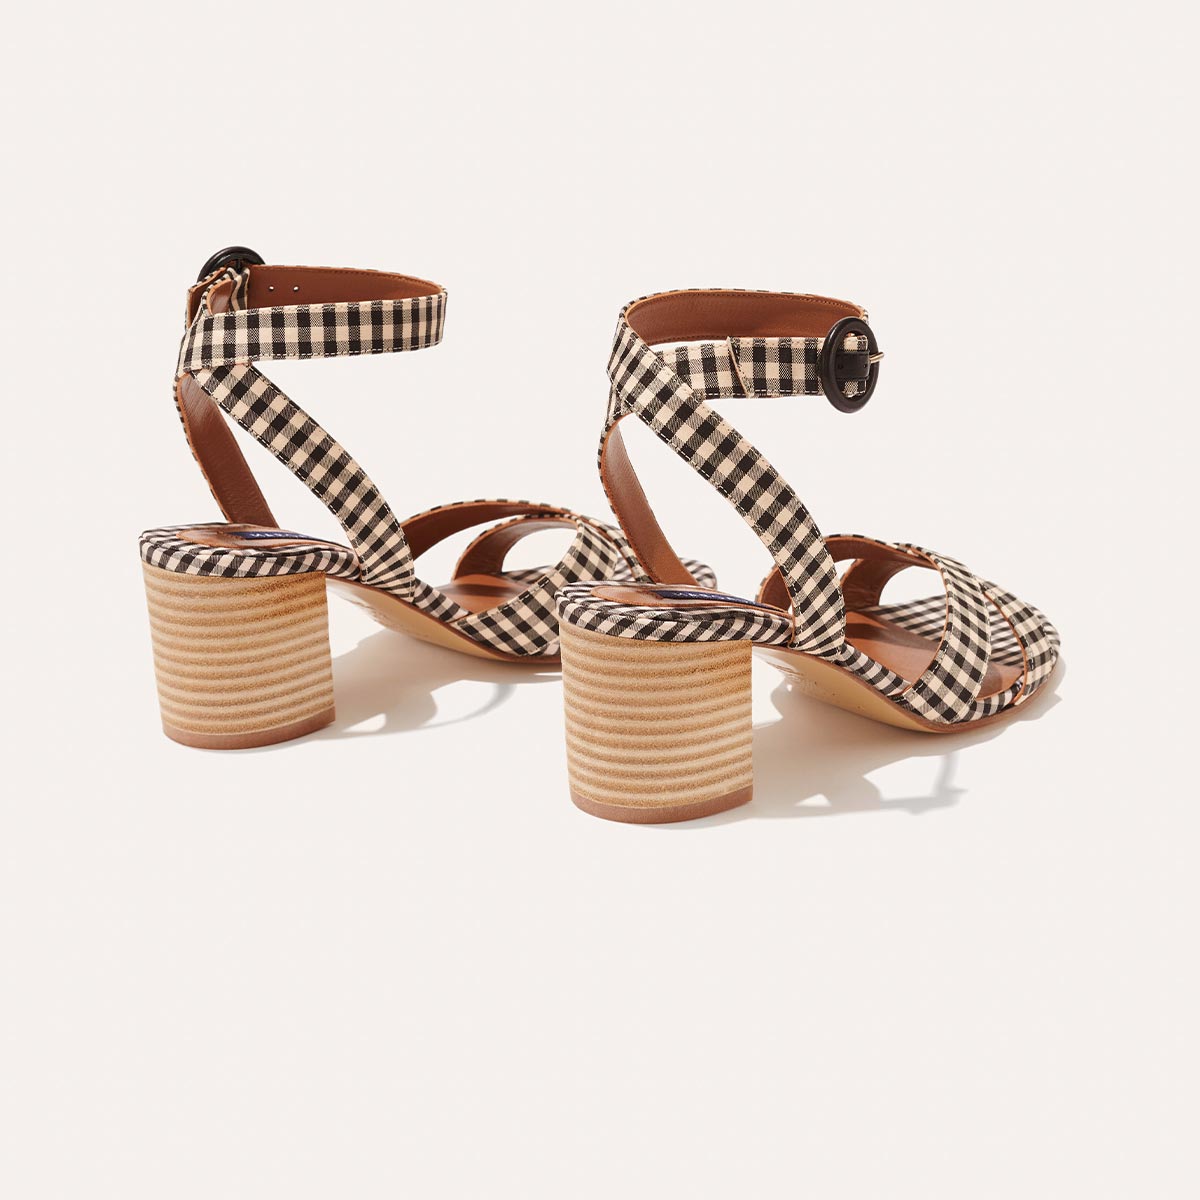 The City Sandal - Tan and Black Gingham